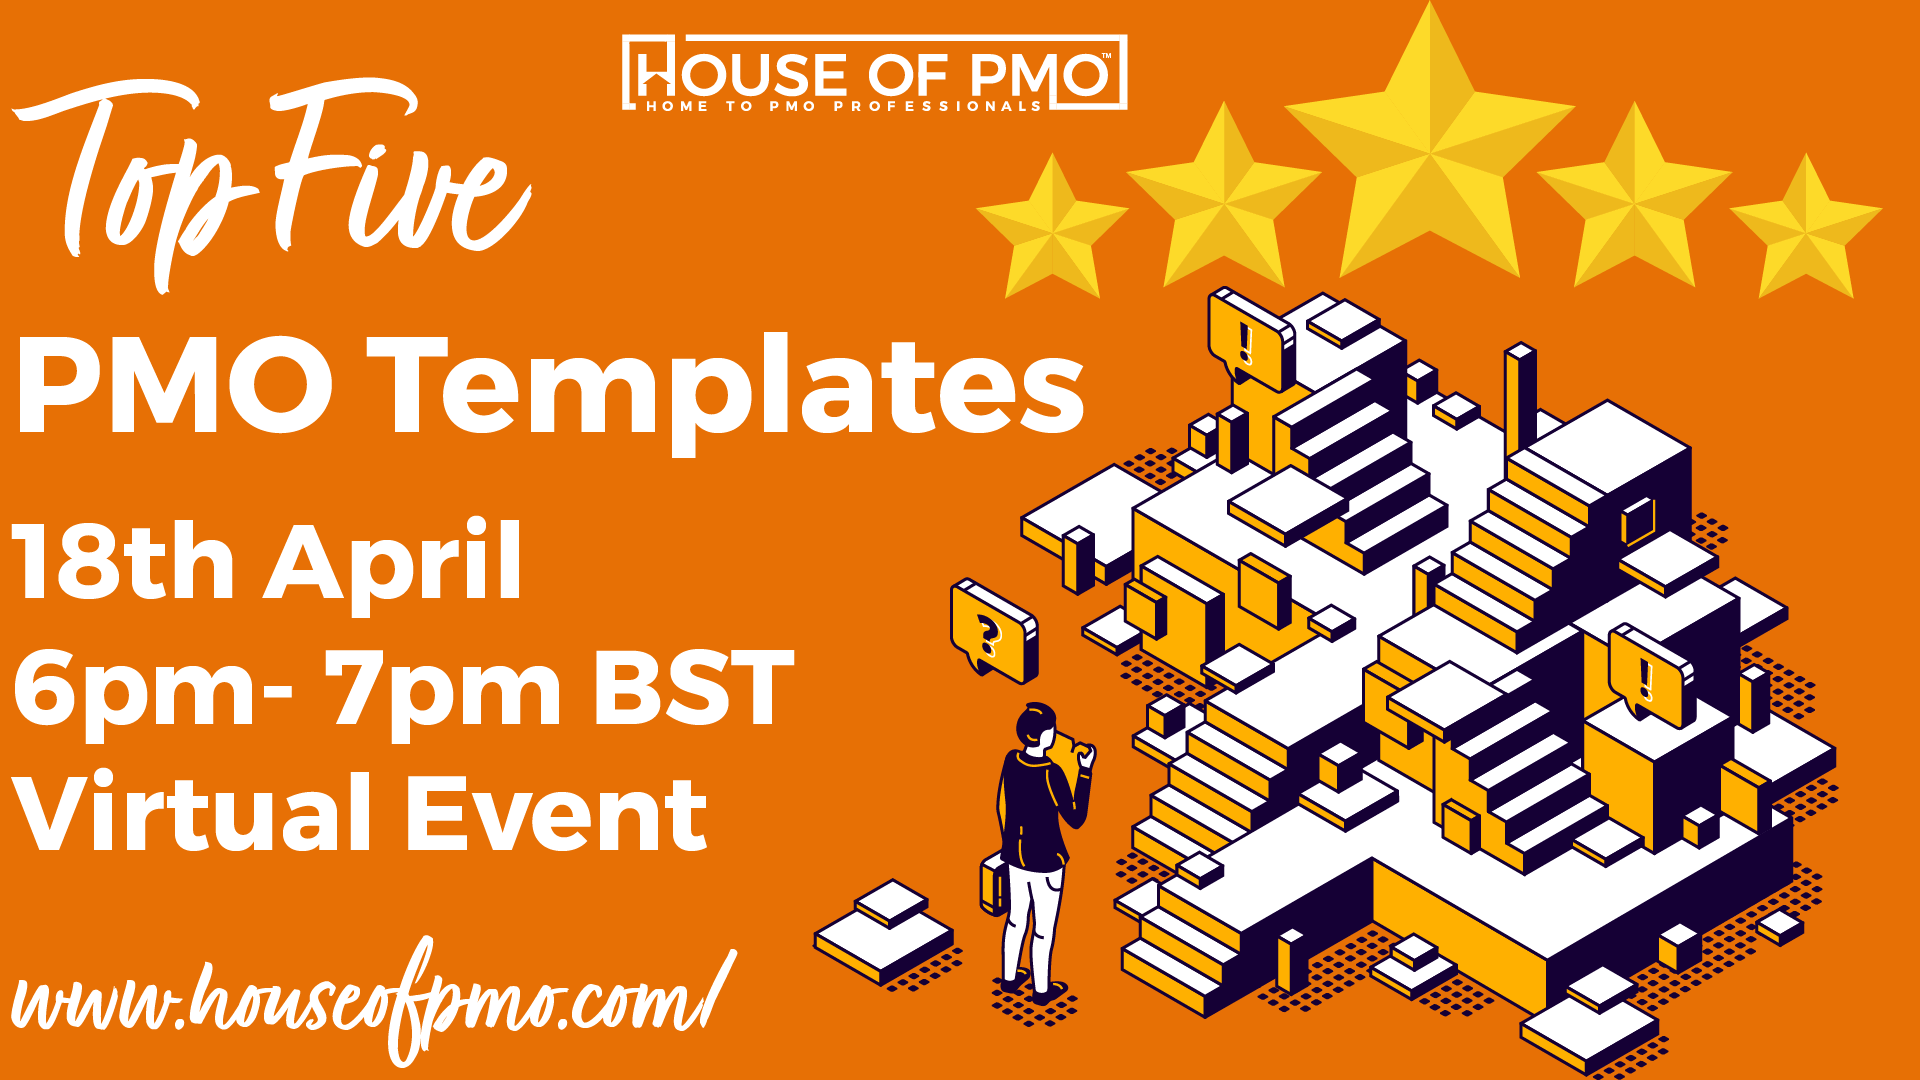 Image for the event top 5 PMO templates happening on the 18th of April 6pm - 7pm